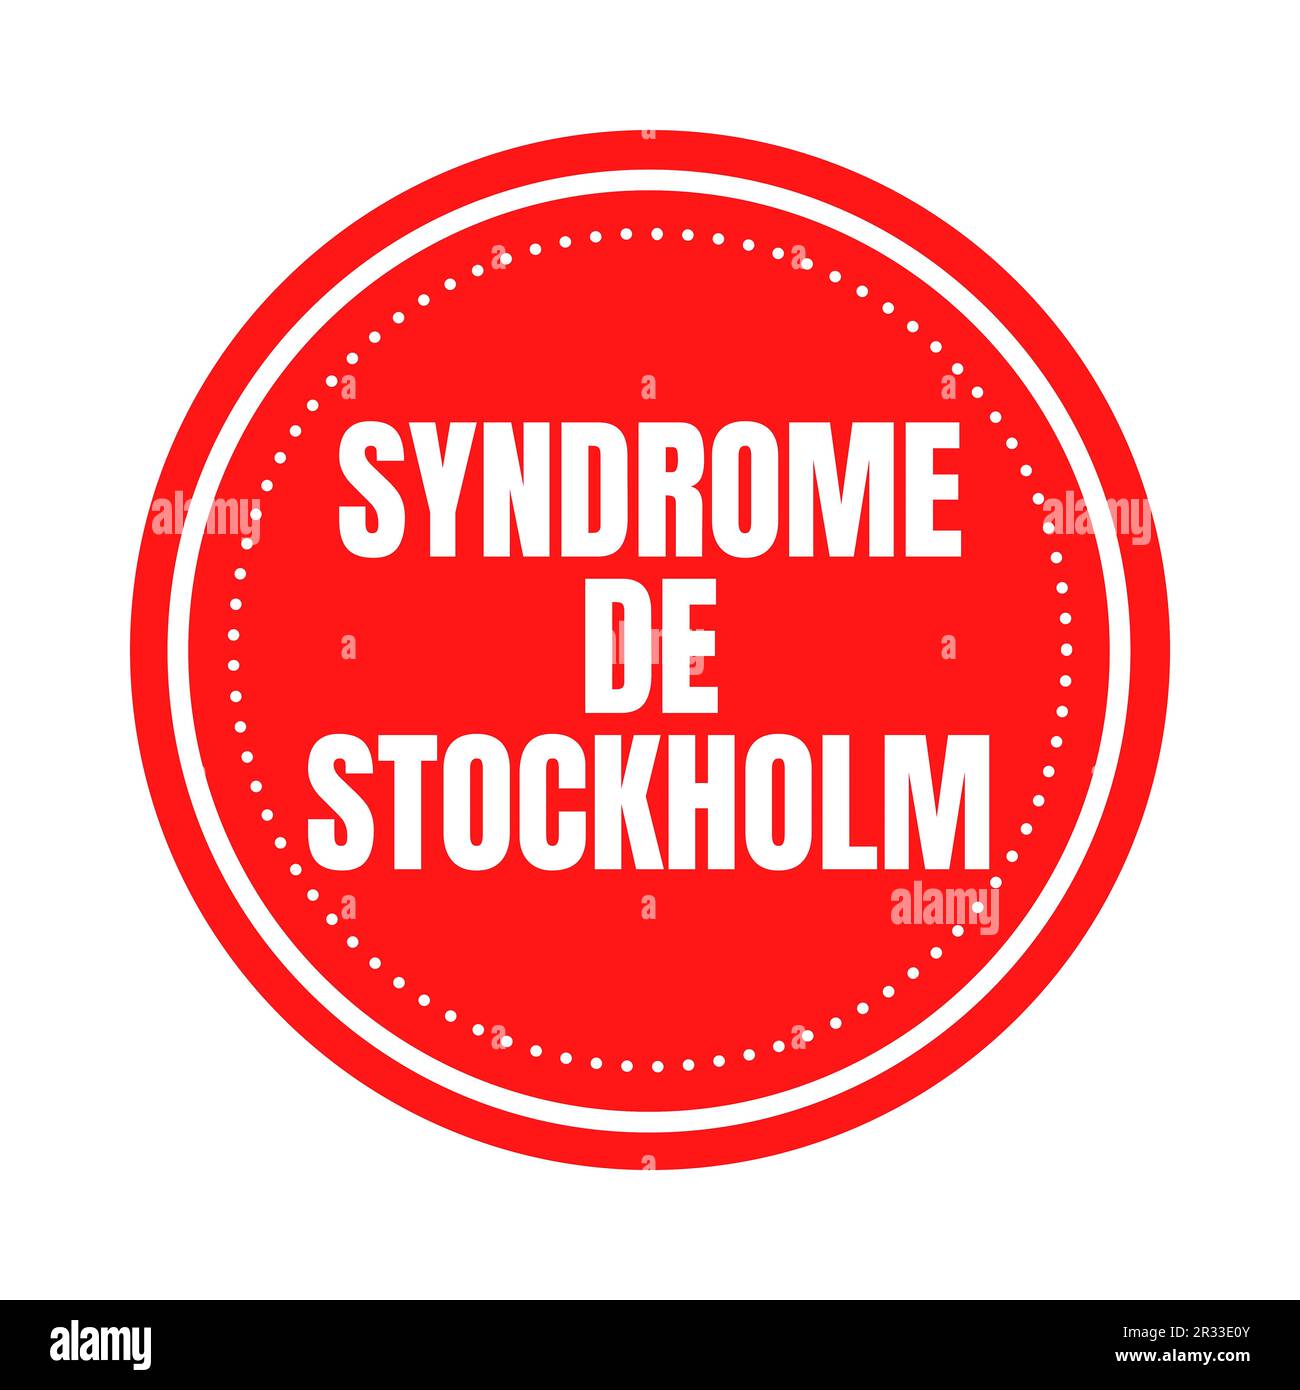 Stockholm syndrome in French language Stock Photo